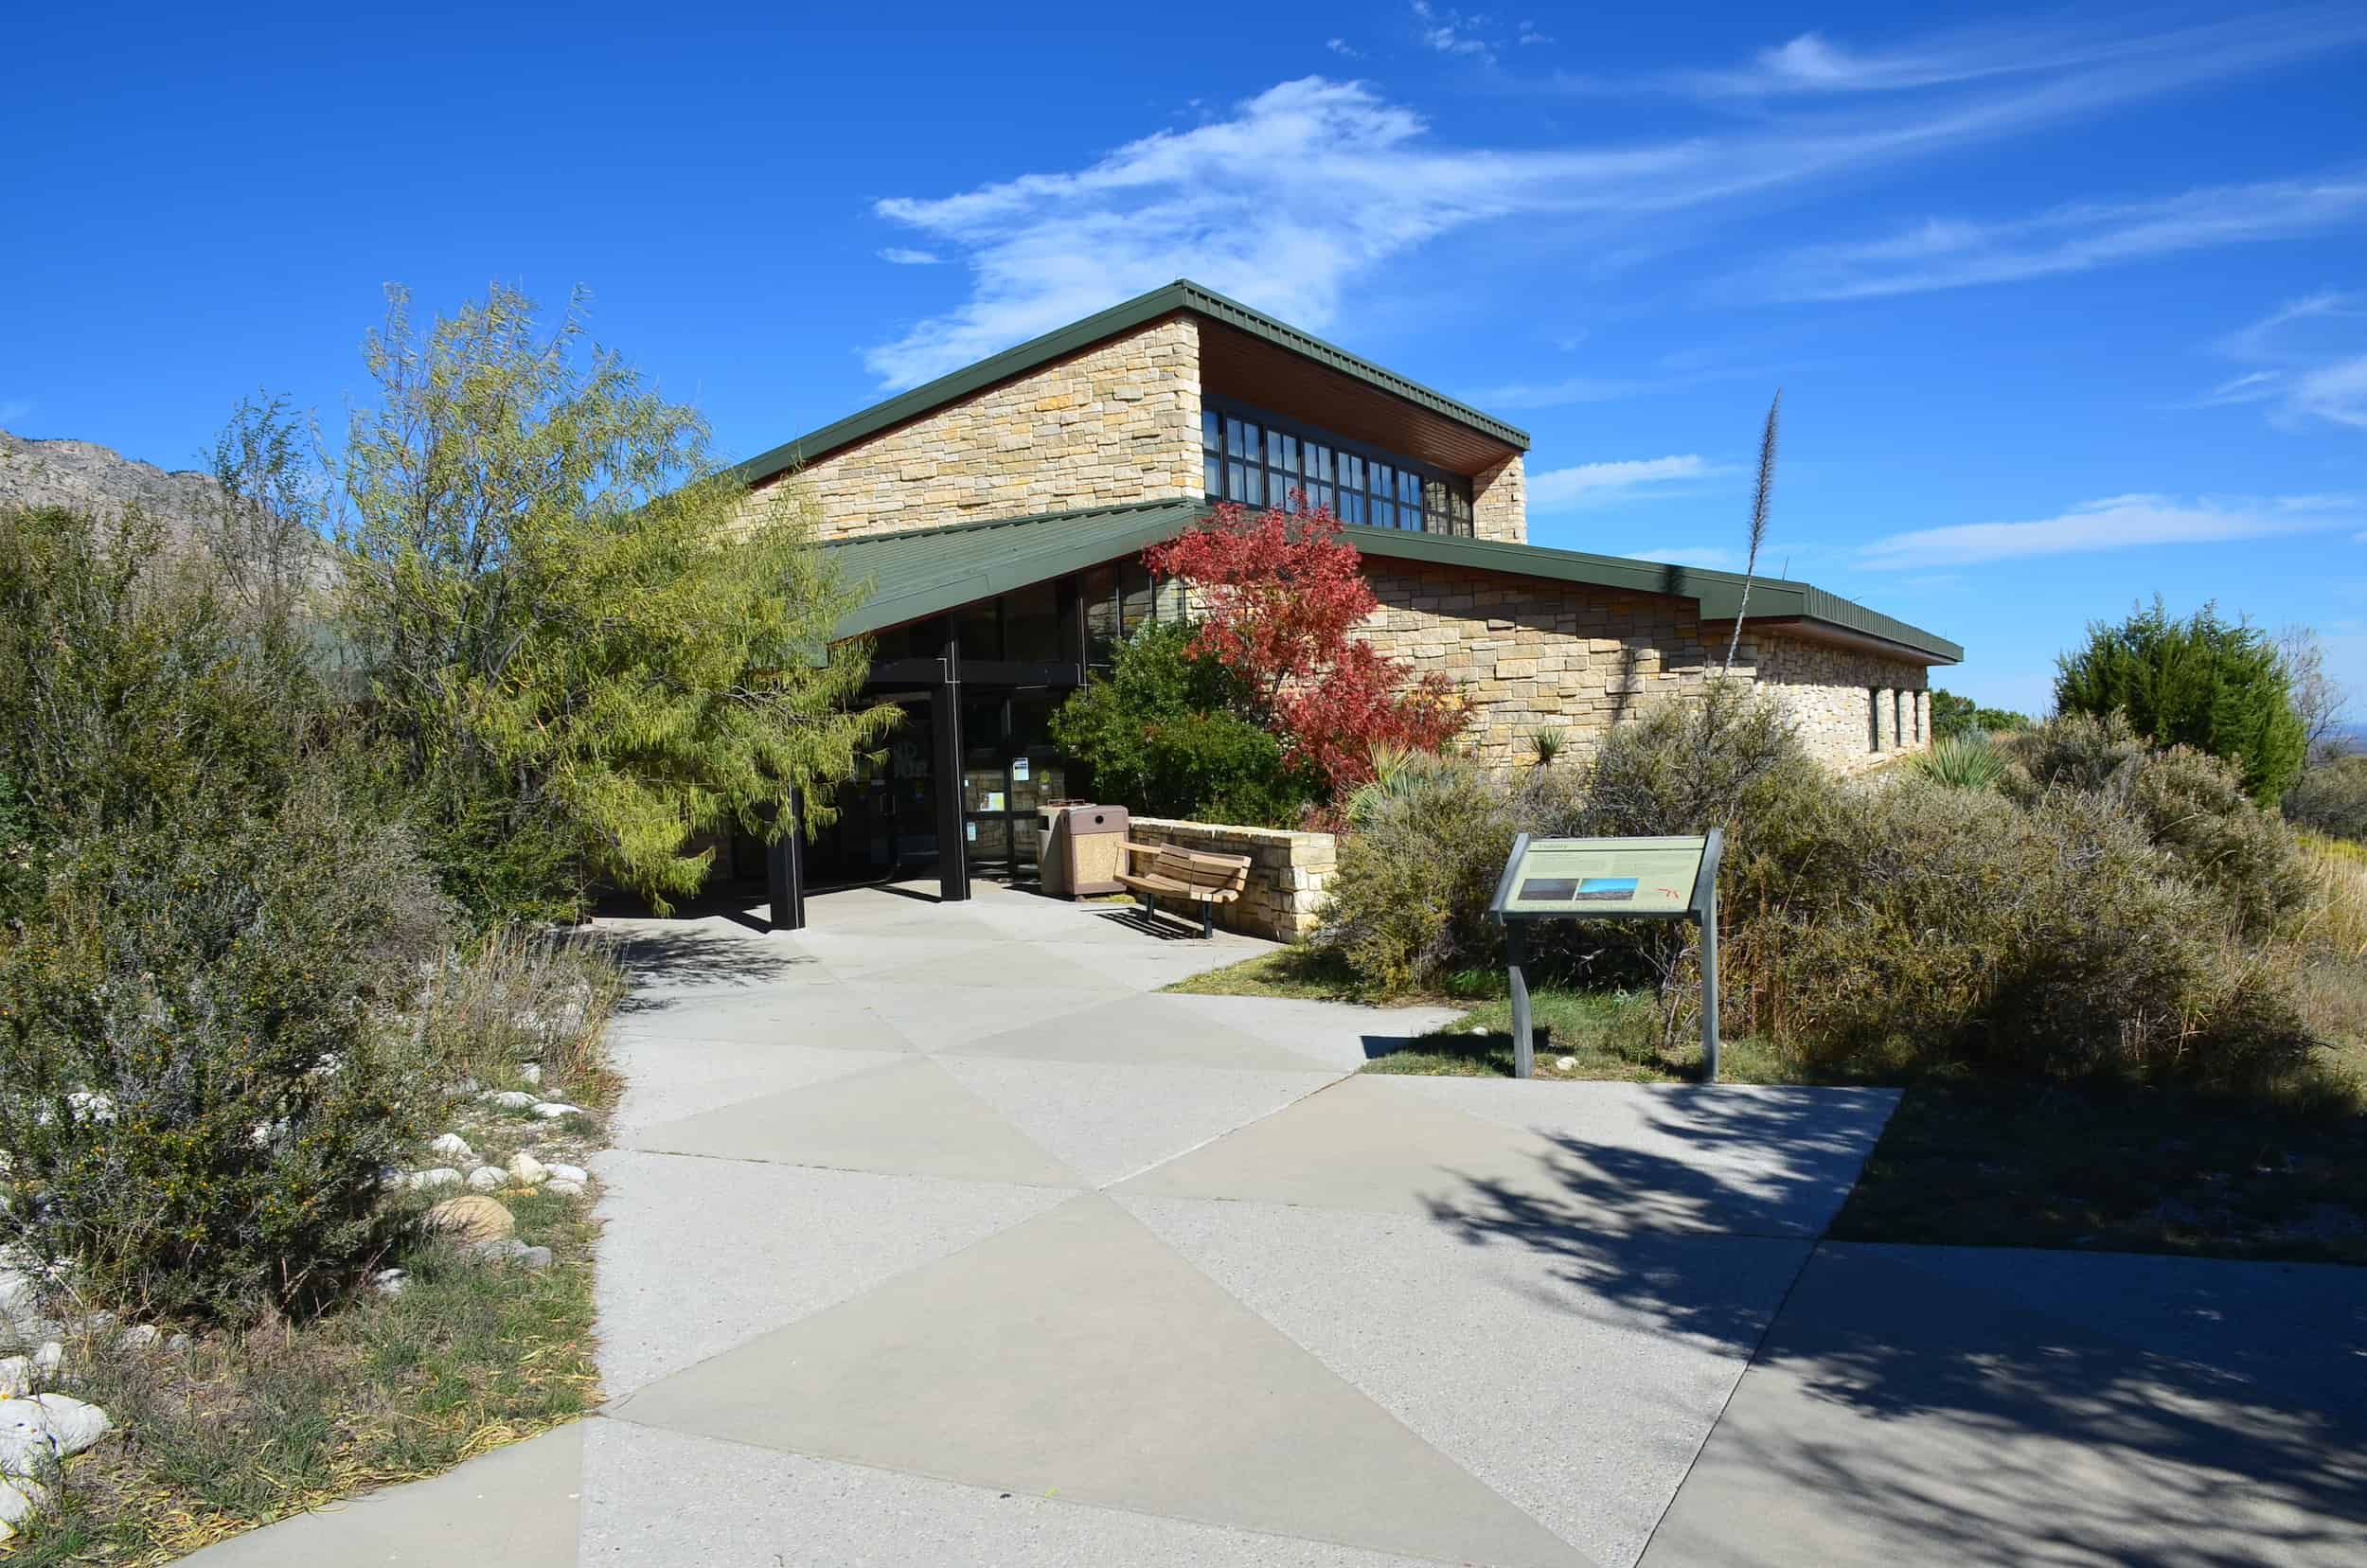 Pine Springs Visitor Center at Guadalupe Mountains National Park in Texas